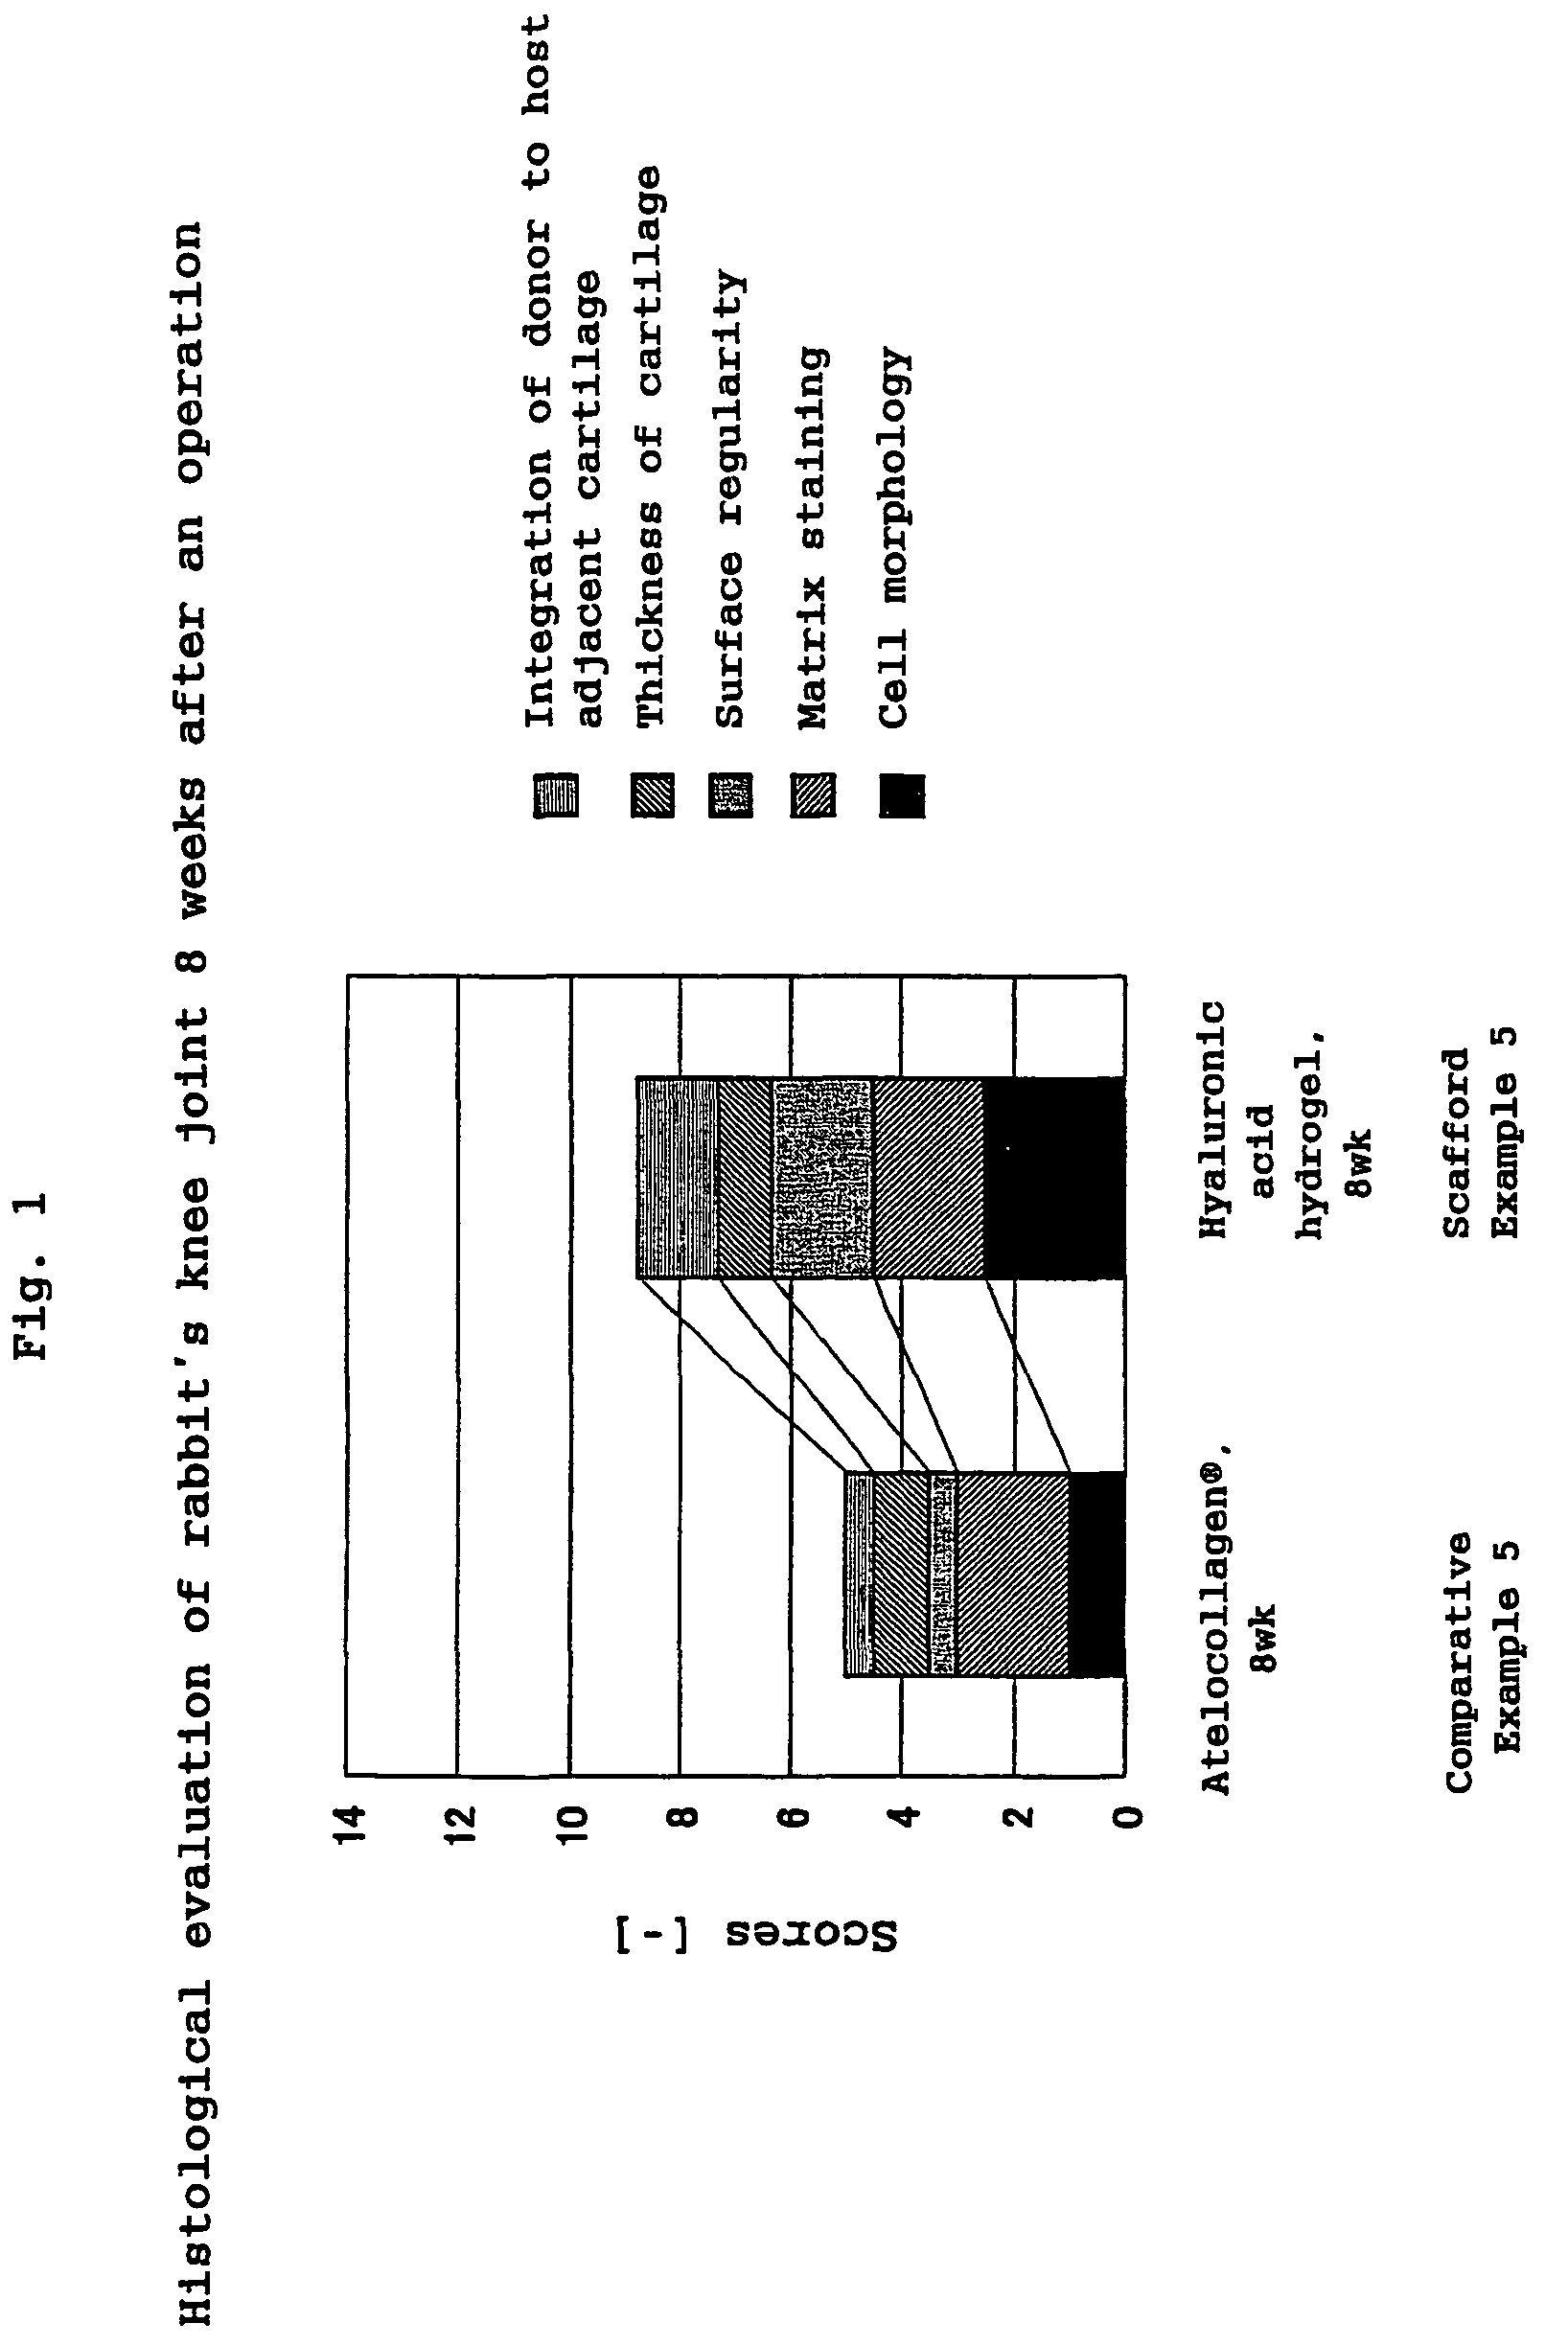 Hyaluronic acid compound, hydrogel thereof and joint treating material